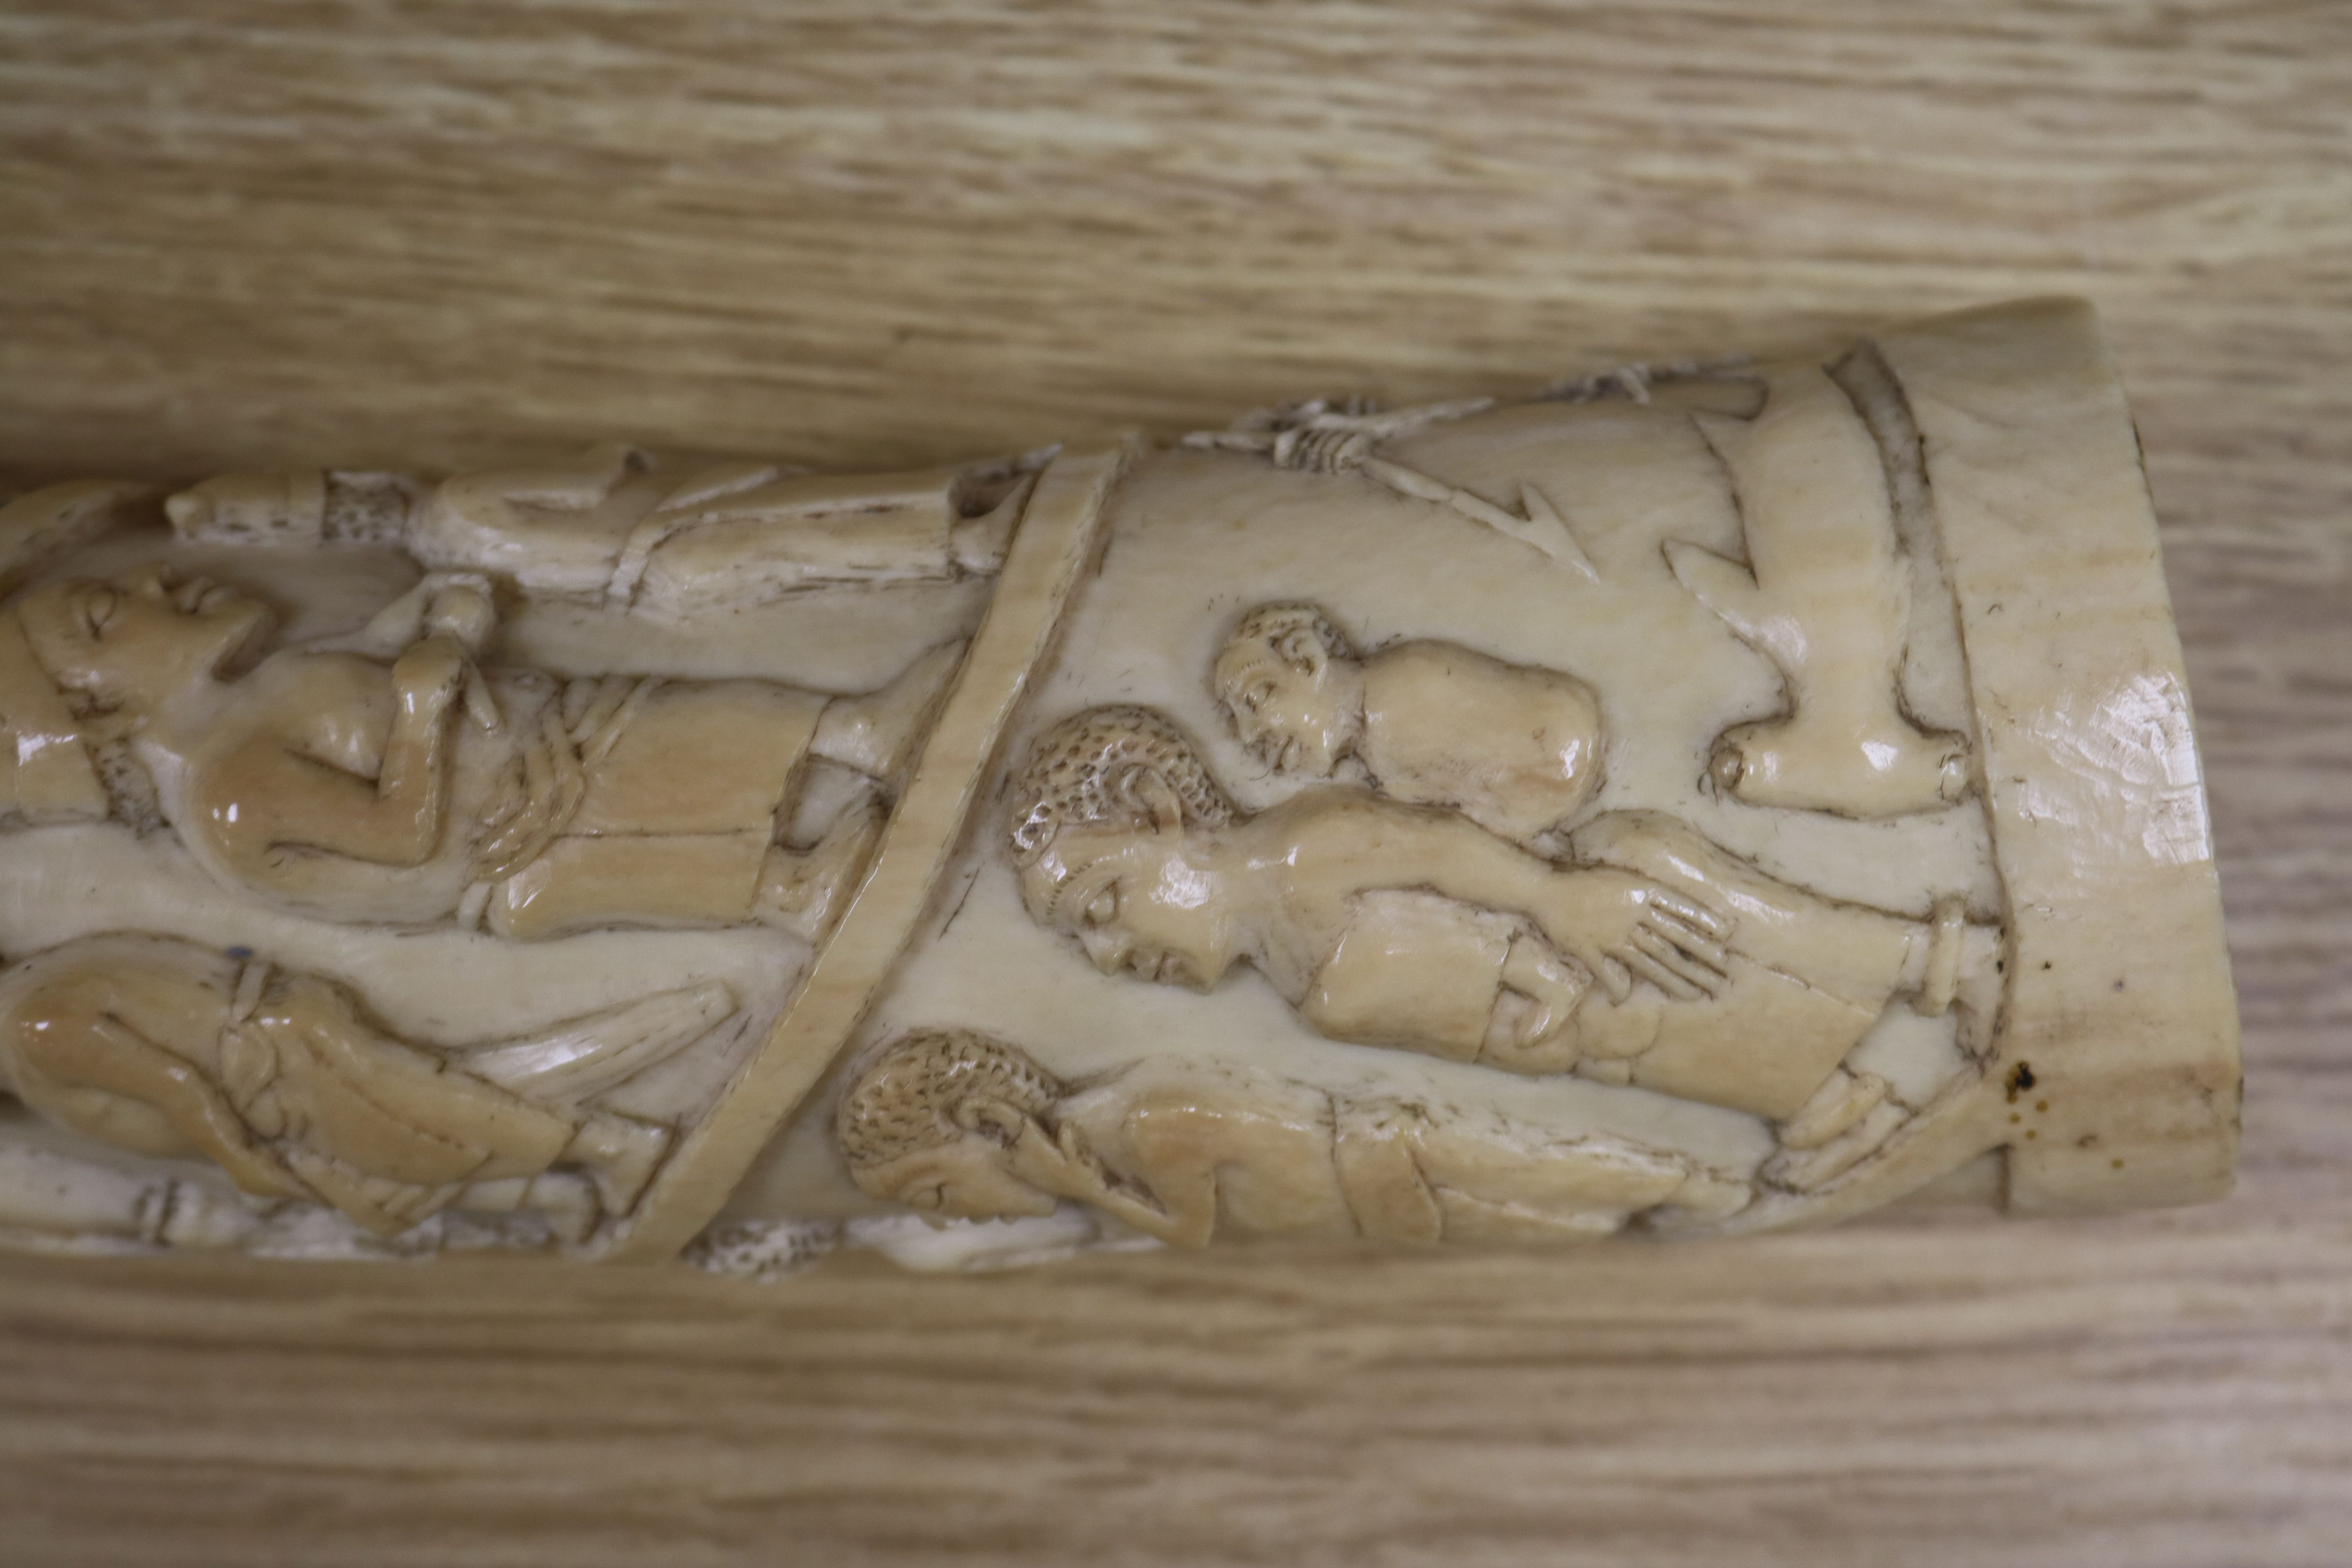 A Belgian Congo ivory oliphant, c.1900, carved with a procession of figures, hammerhead shark - Image 2 of 9